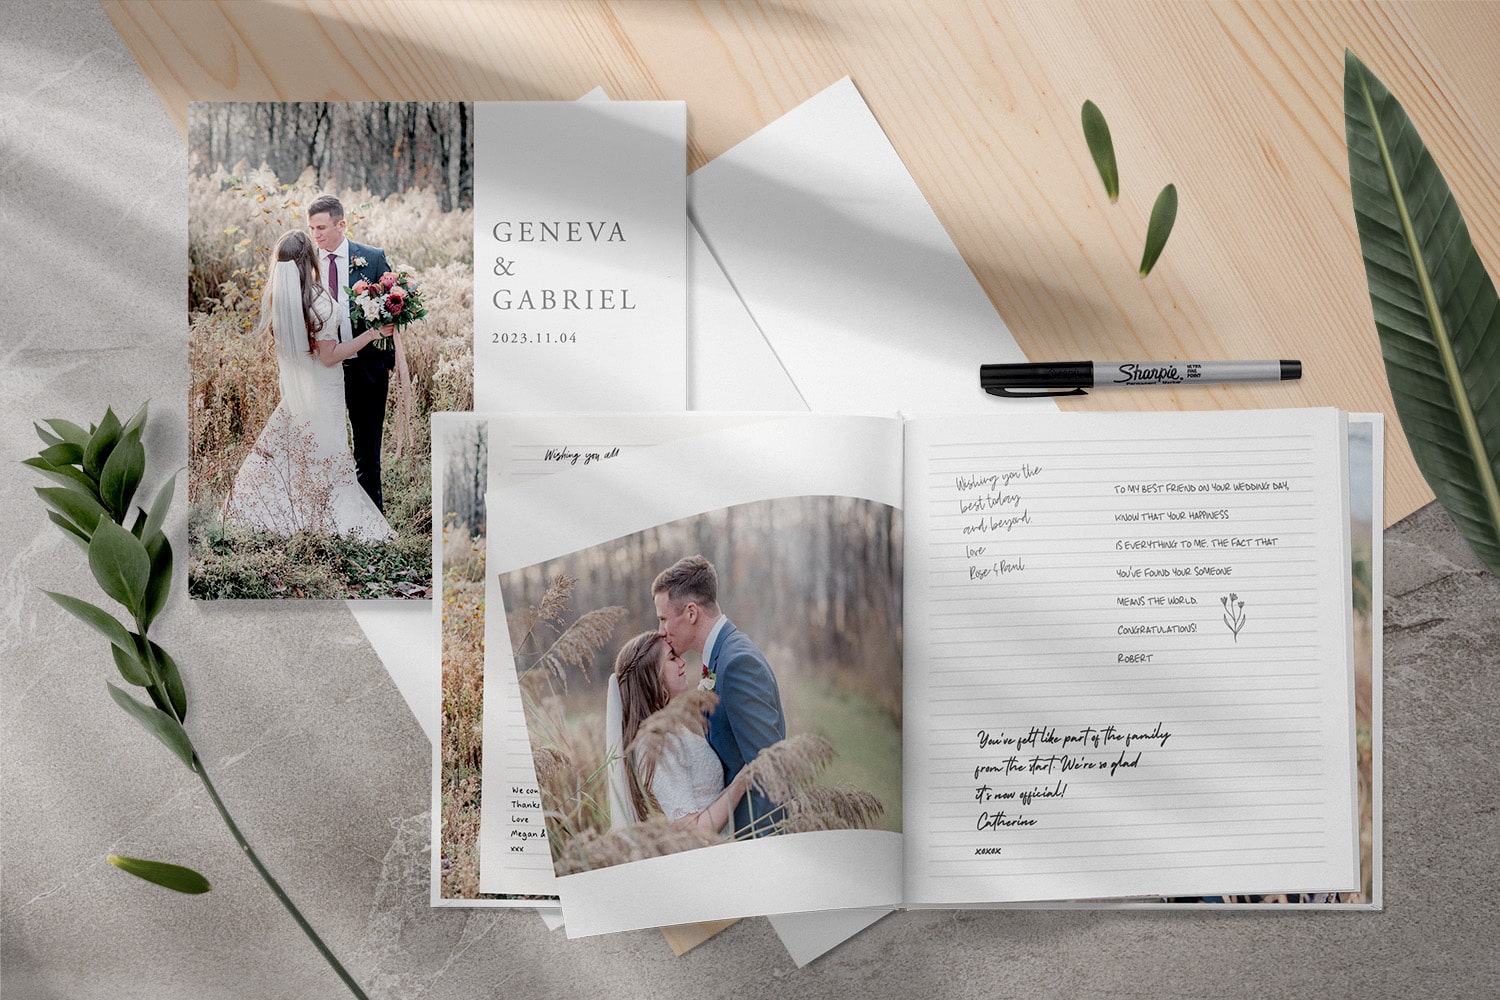 A Unique Guest Book: Turn Your Engagement or Pre-Wedding Photos into a Personalized Guest Book